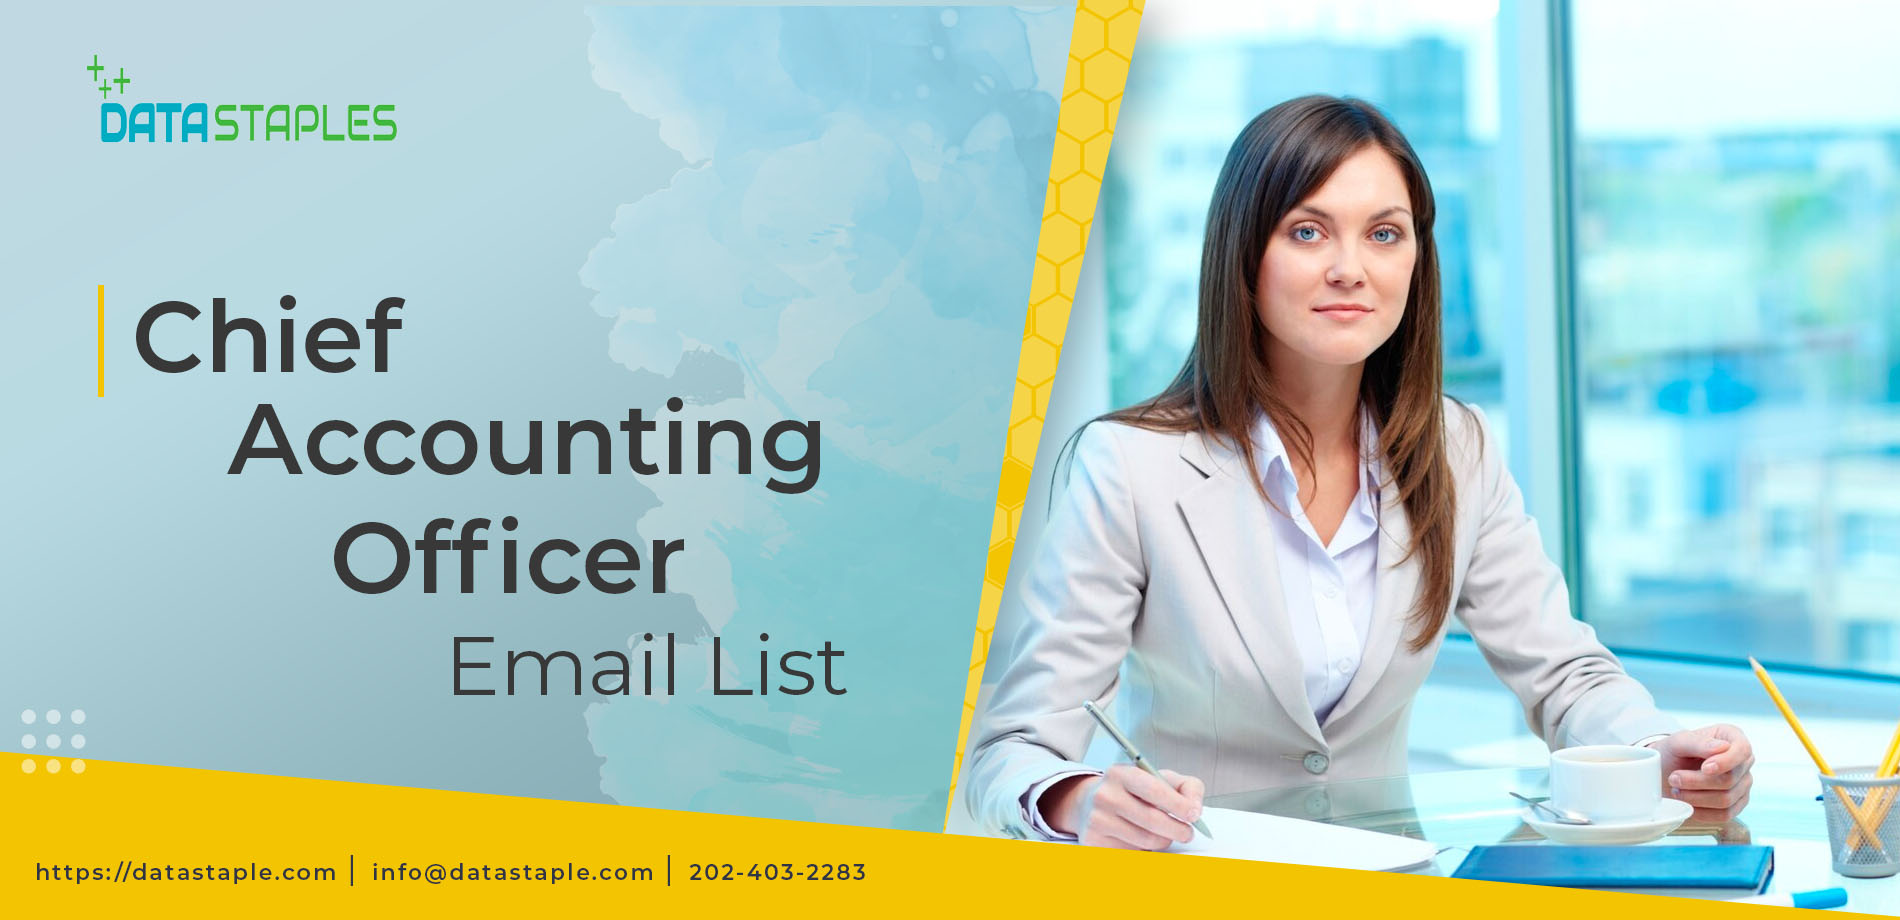 Chief Accounting Officer Email List | DataStaples